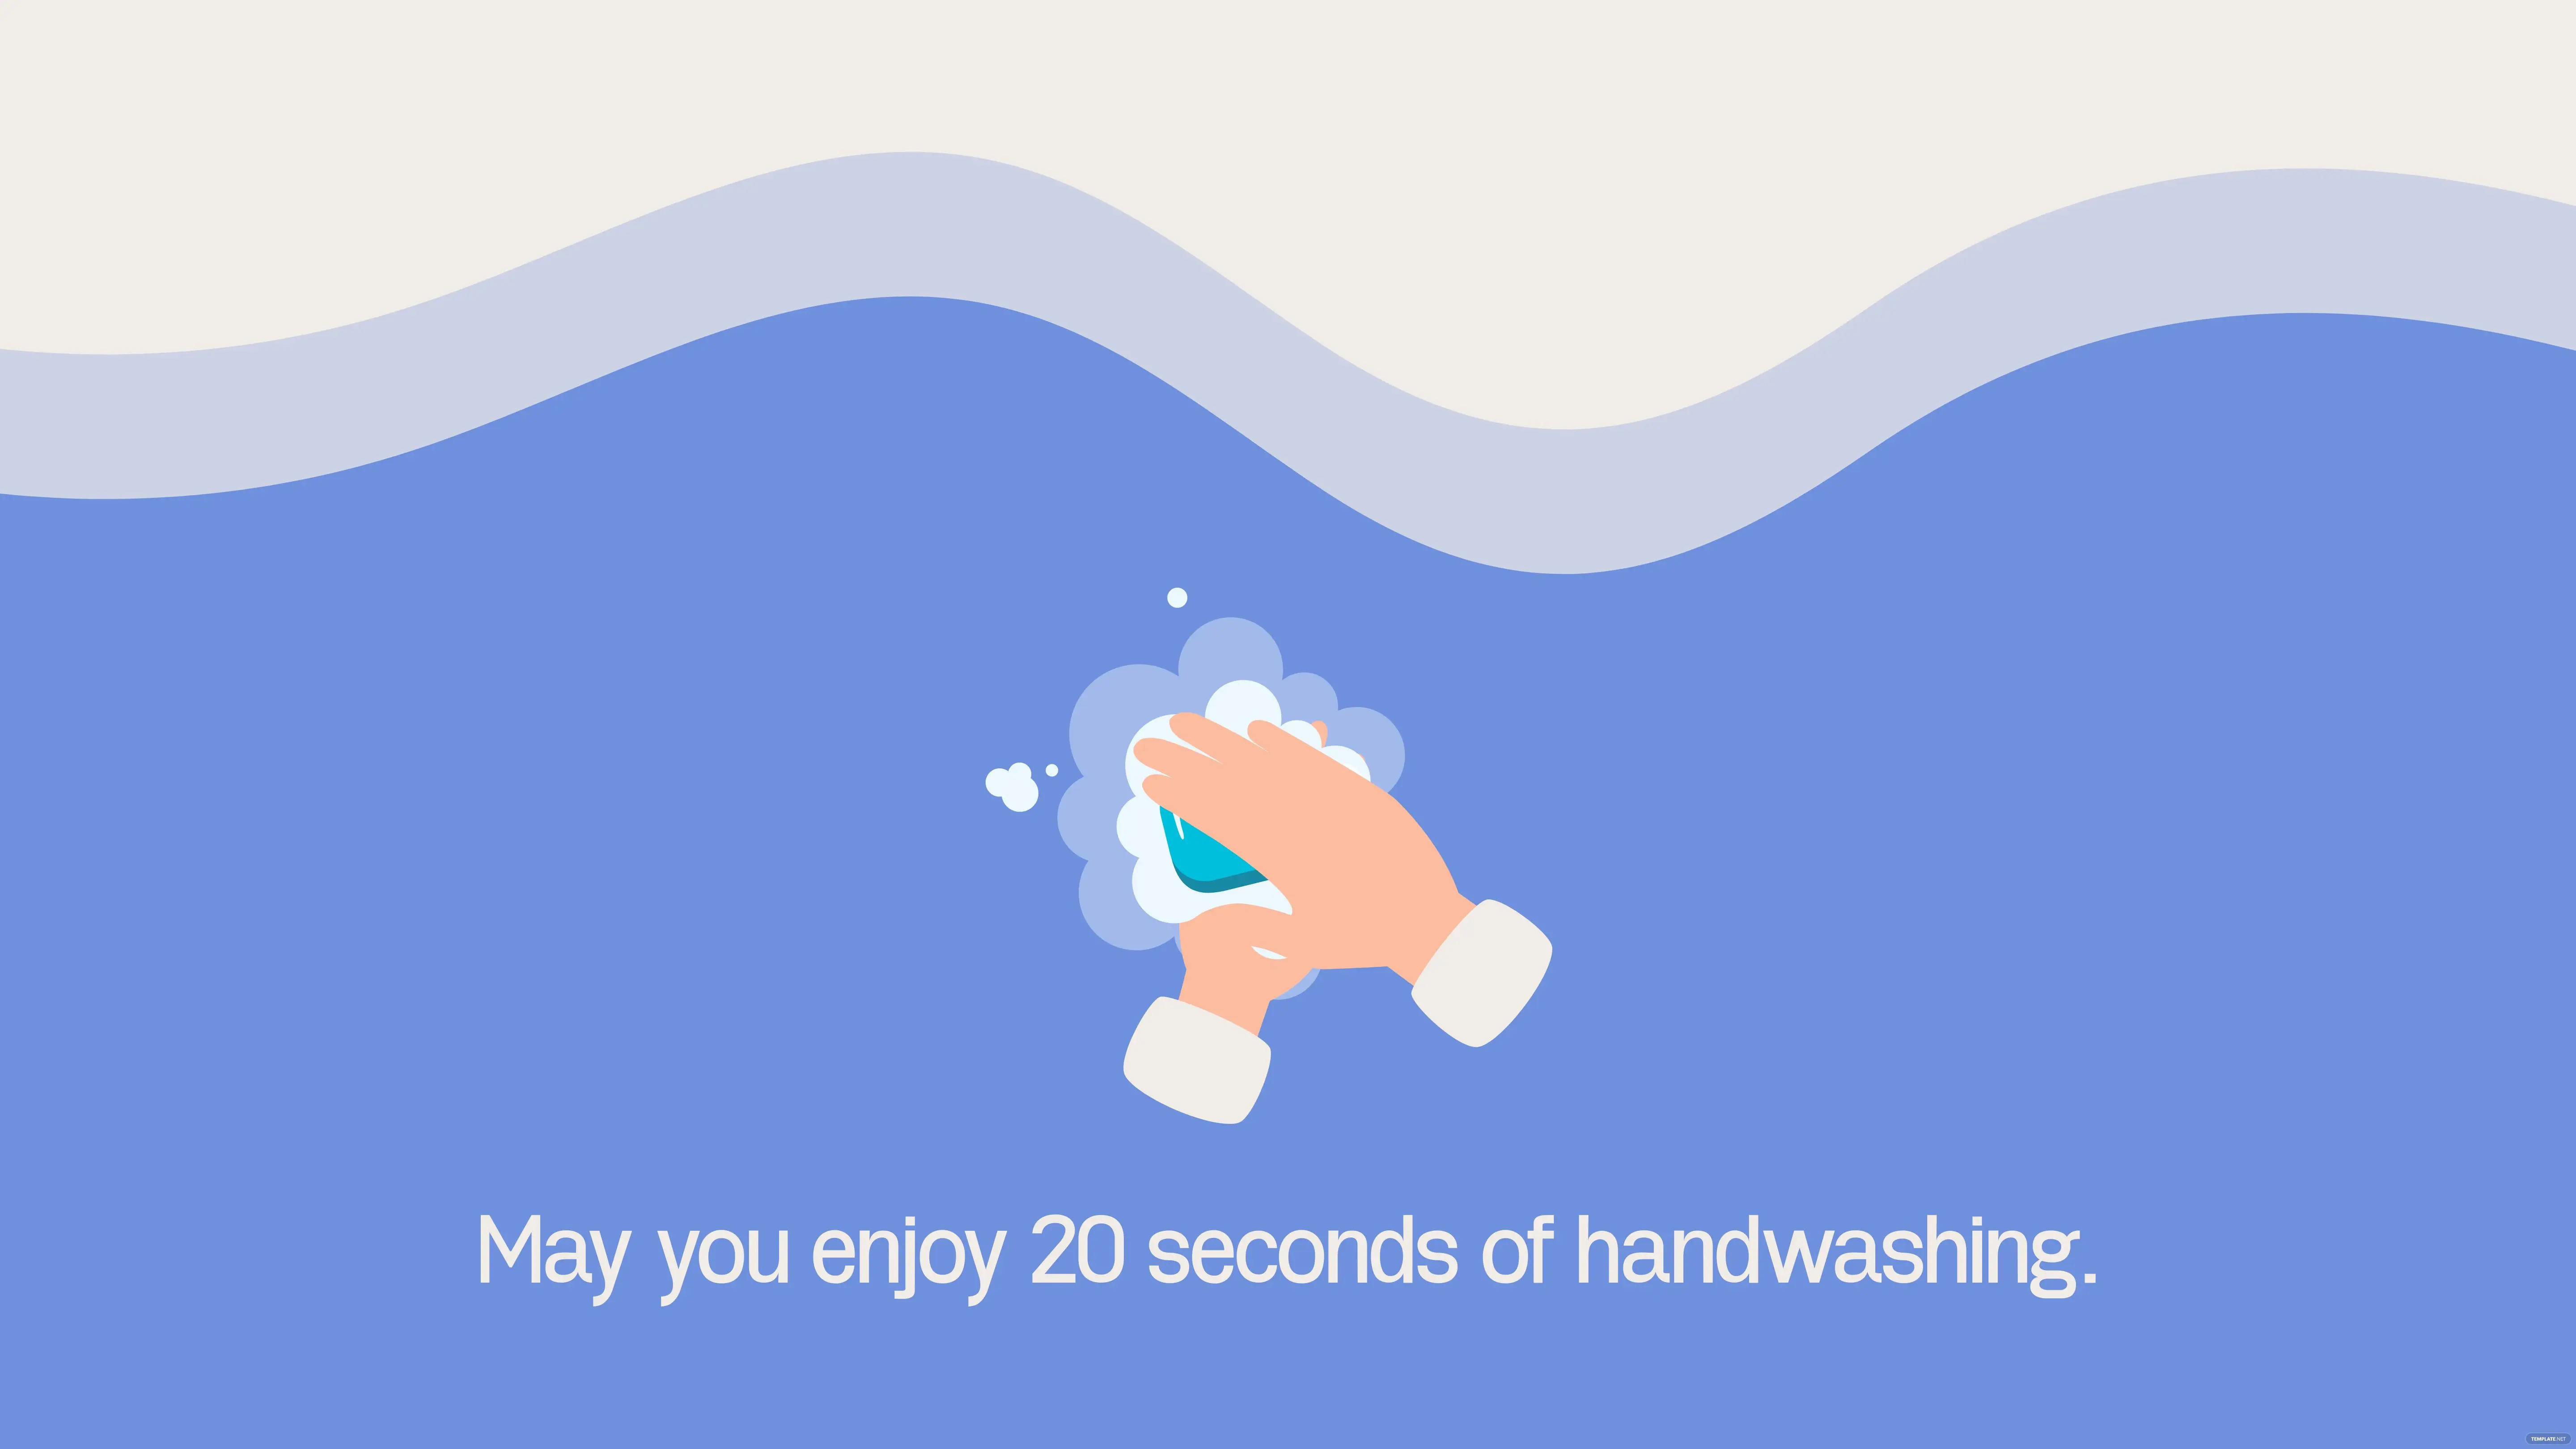 global-handwashing-day-greeting-card-background-ideas-and-examples